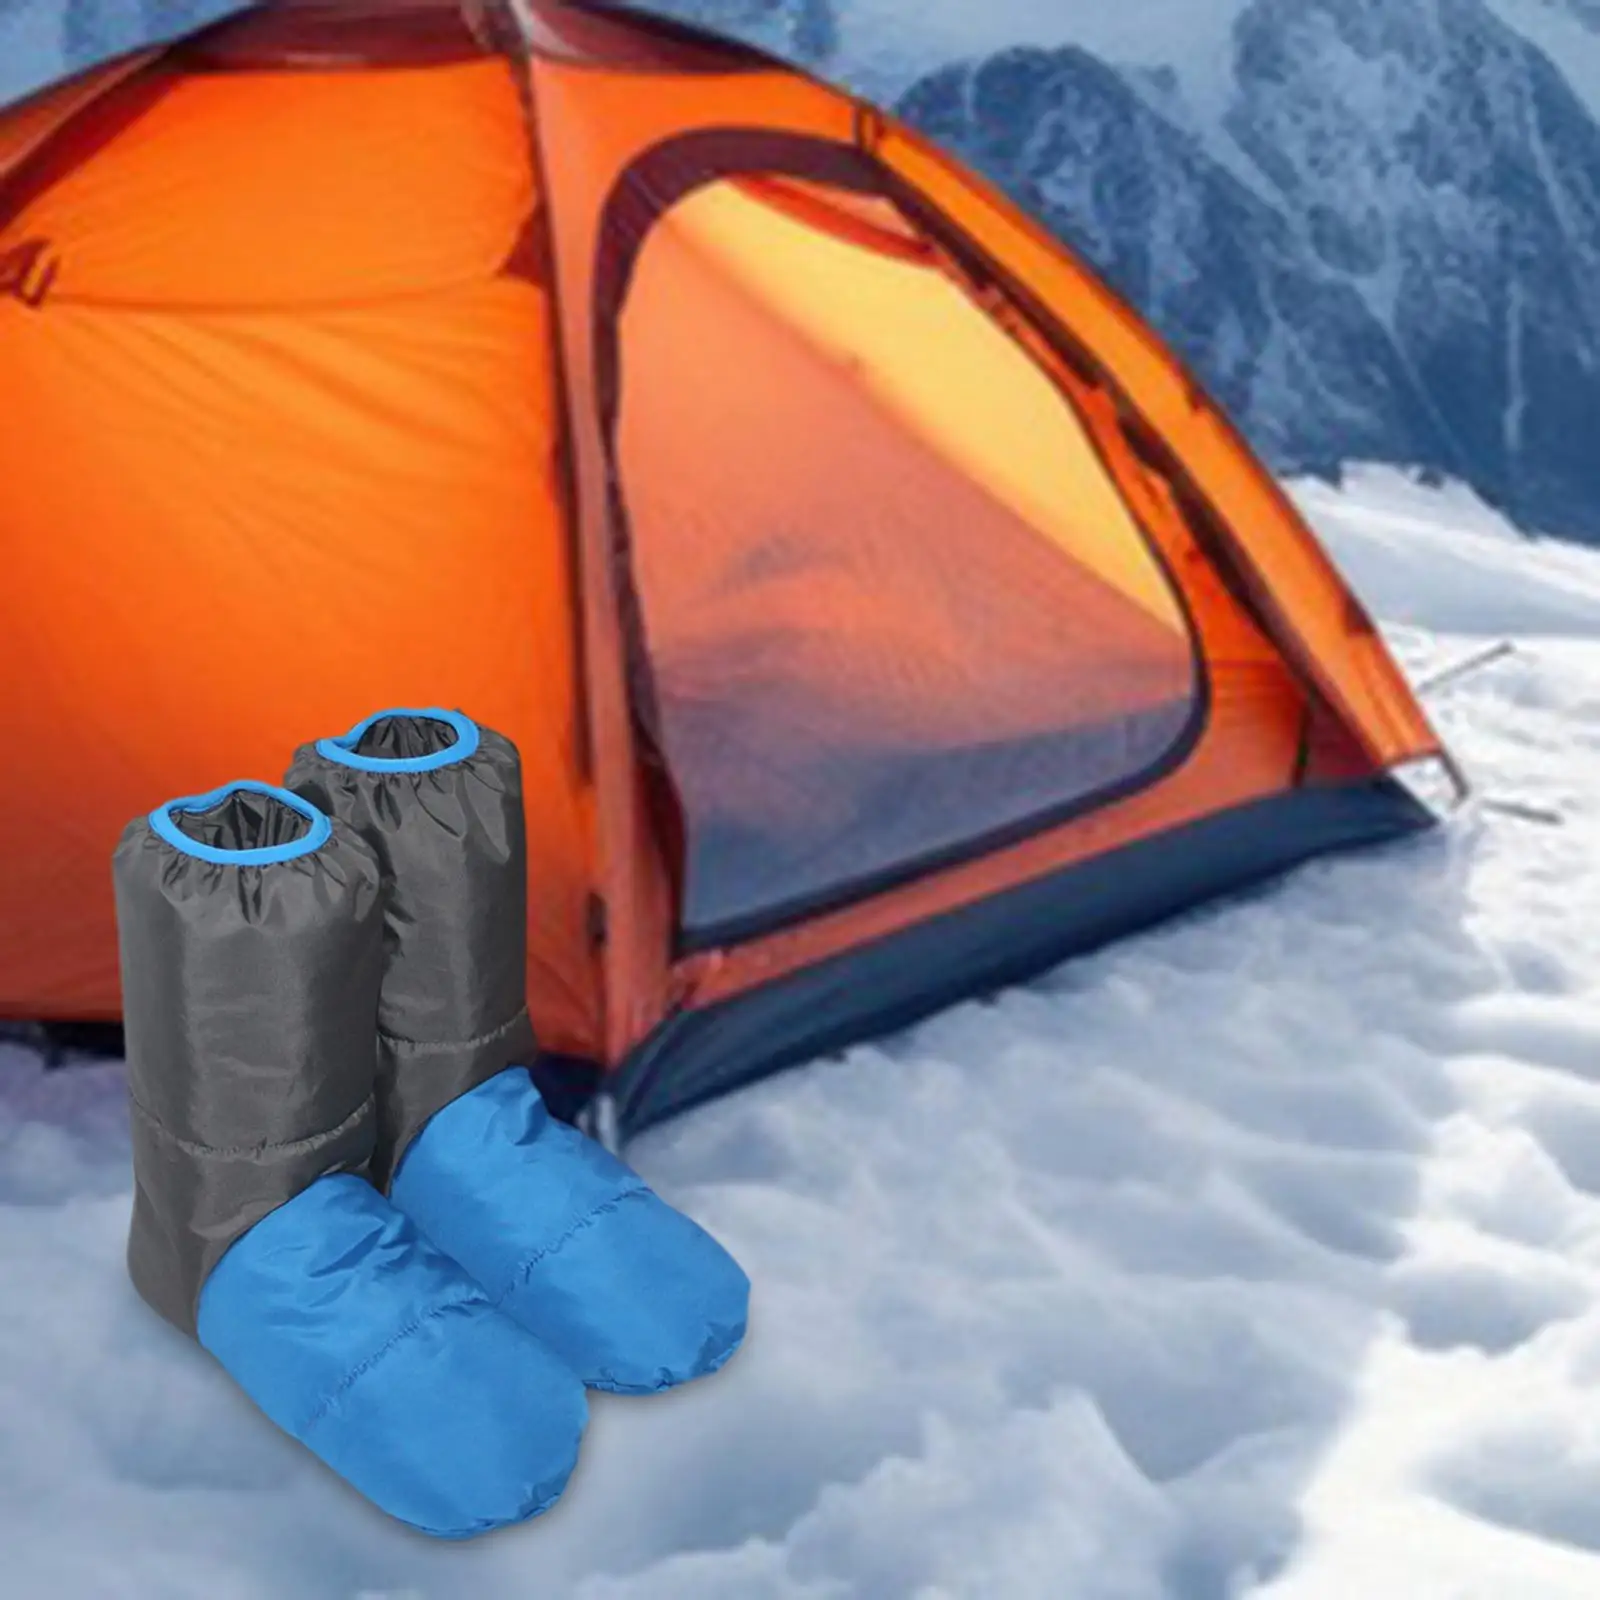 Down Booties Winter Shoes Foot Socks Windproof Down Slipper Boots for Camping Hiking Home Men Women Sleeping Bag Accessories